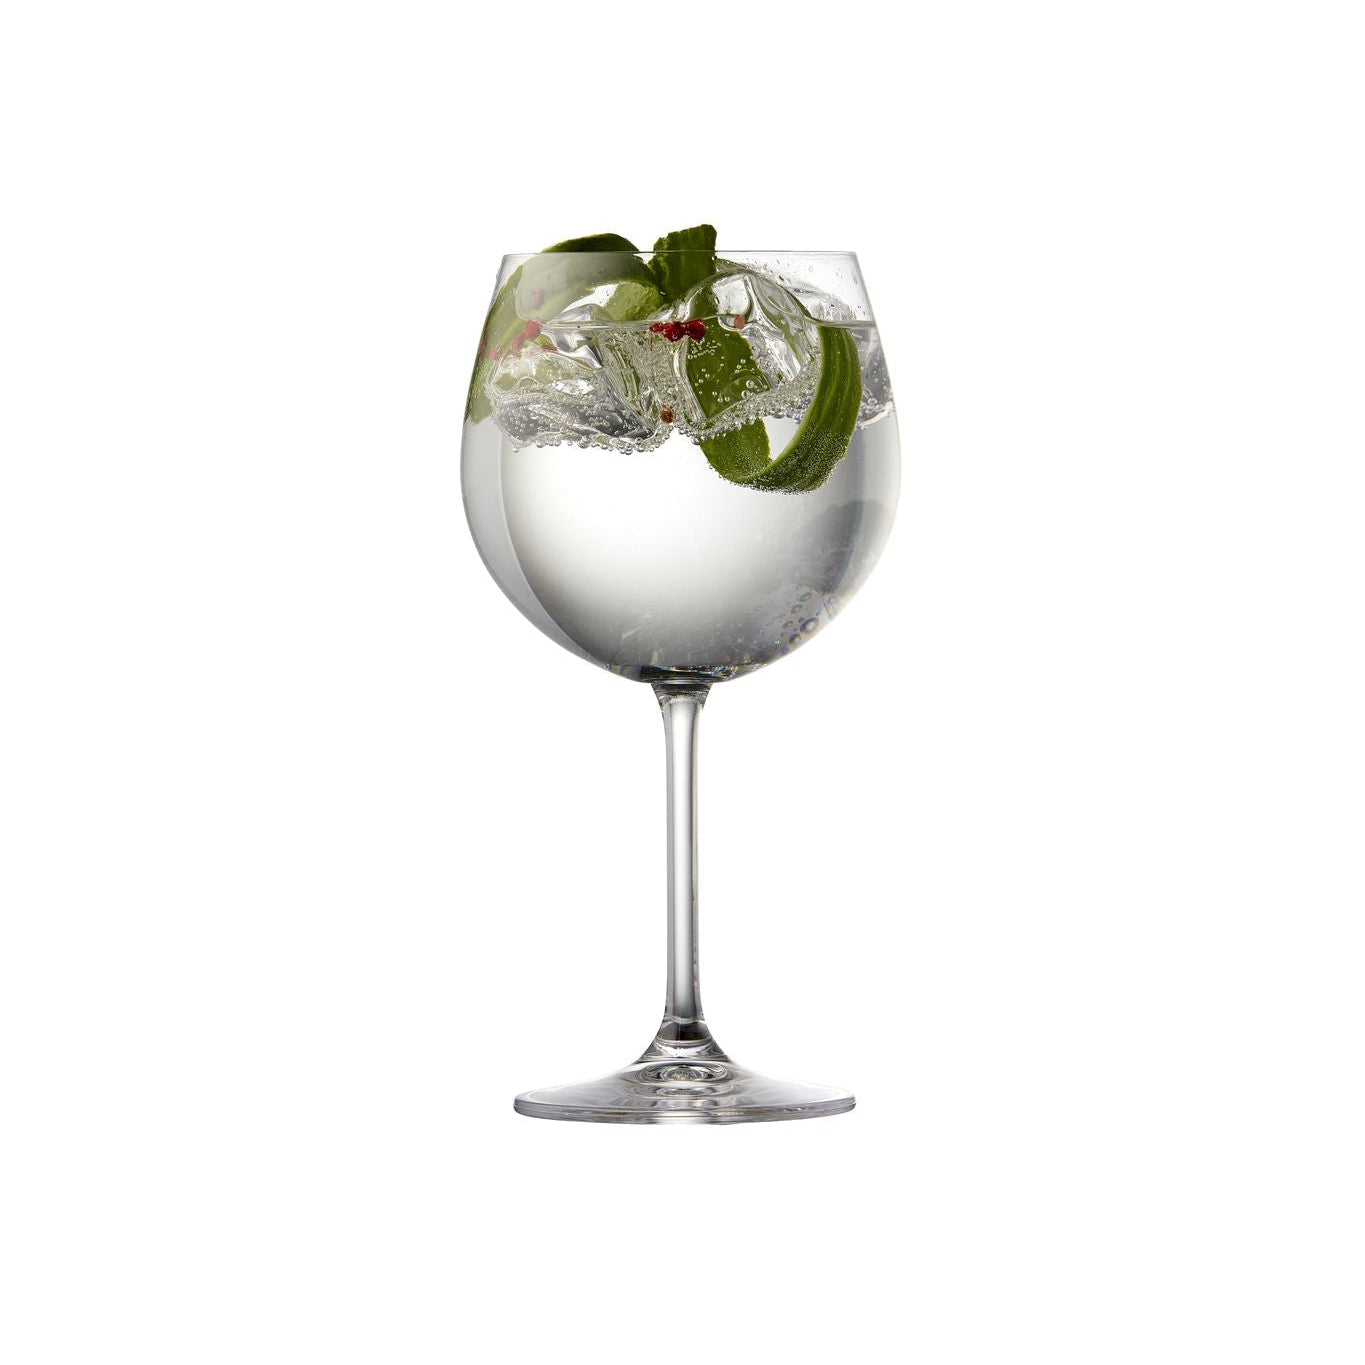 Lyngby Glas Juvel Gin & Tonic Glass 57 Cl, 4 PC.